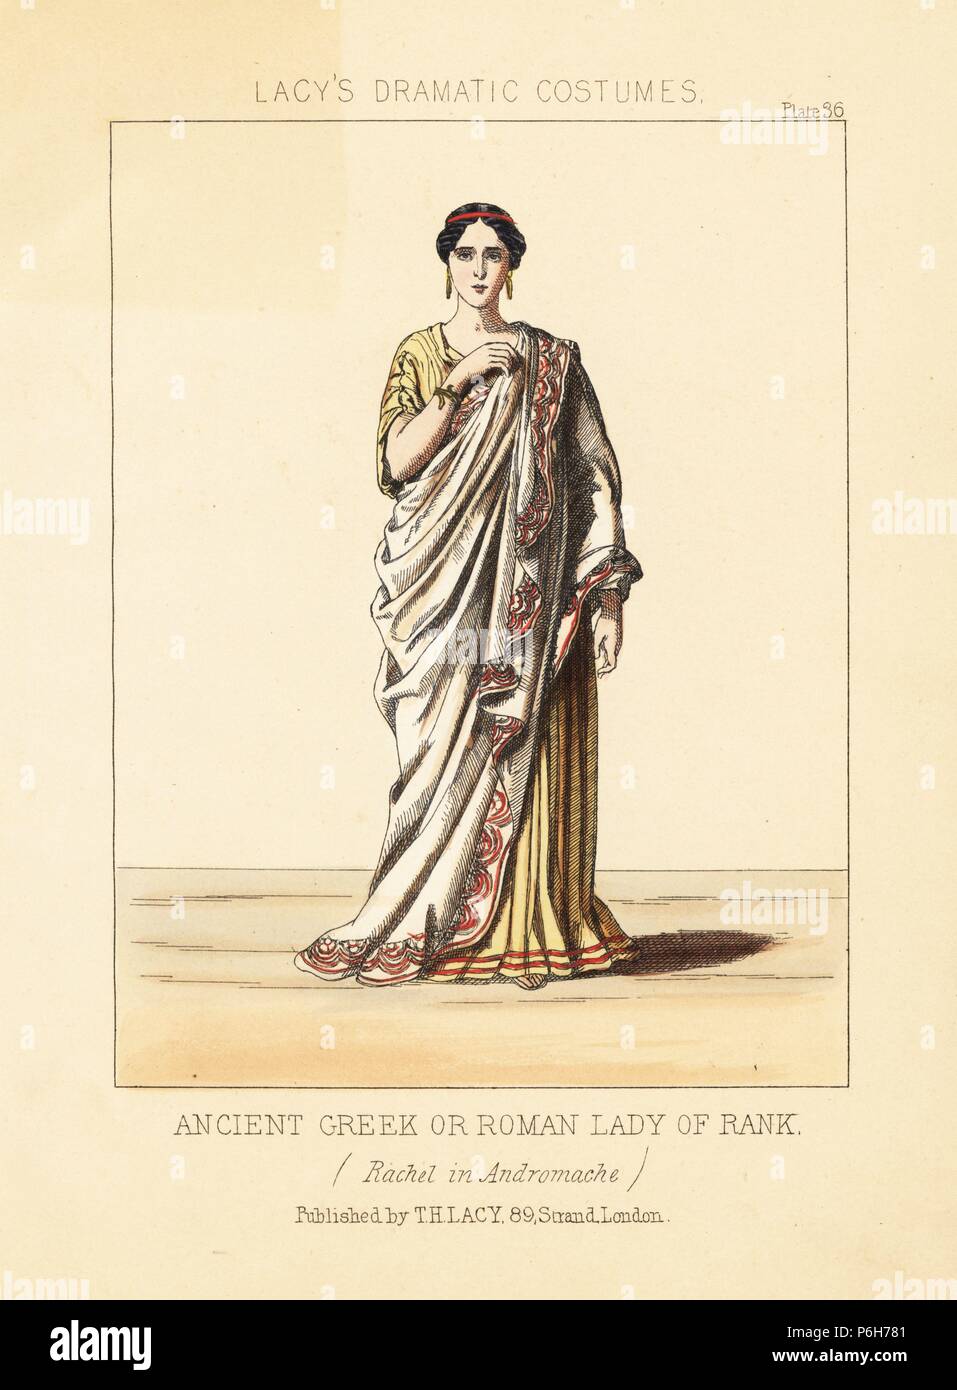 French classical actress Mademoiselle Rachel or Elisabeth Rachel Felix in Jean Racine's 'Andromaque,' 1849, ancient Greek or Roman lady of rank. Handcoloured lithograph from Thomas Hailes Lacy's 'Female Costumes Historical, National and Dramatic in 200 Plates,' London, 1865. Lacy (1809-1873) was a British actor, playwright, theatrical manager and publisher. Stock Photo